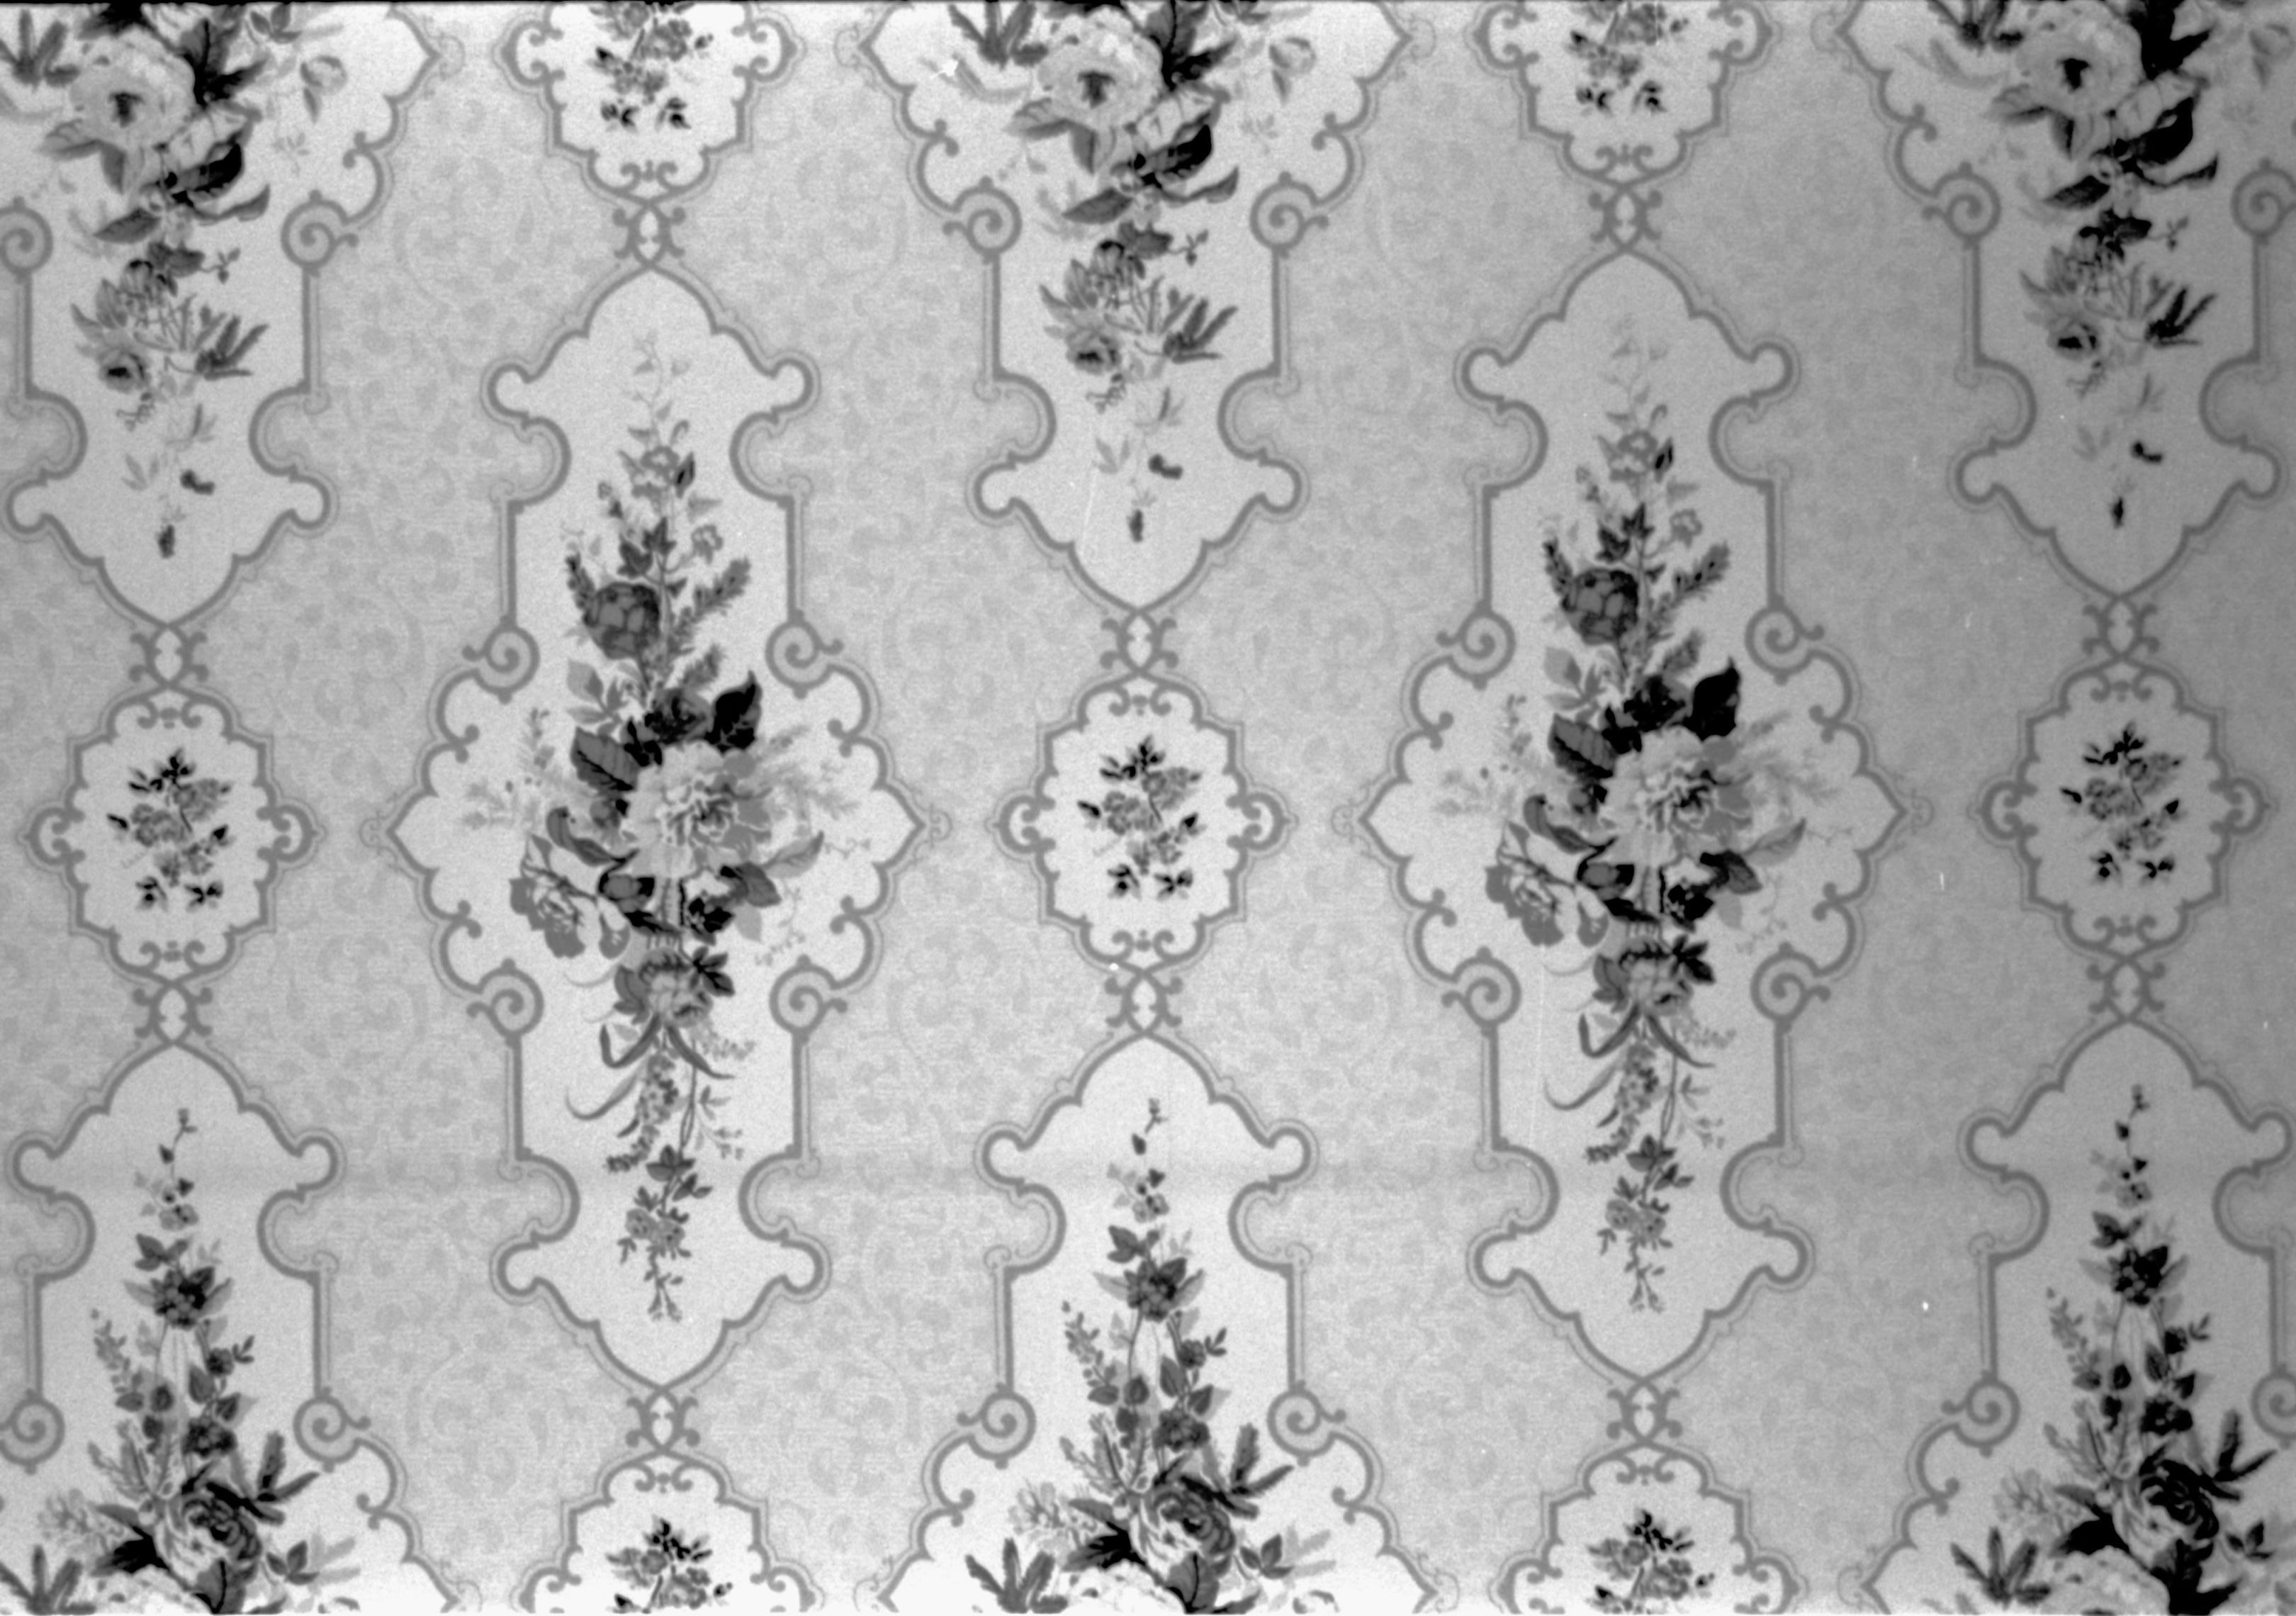 NA Lincoln Home NHS, investigation of wall paper investigation, wall paper